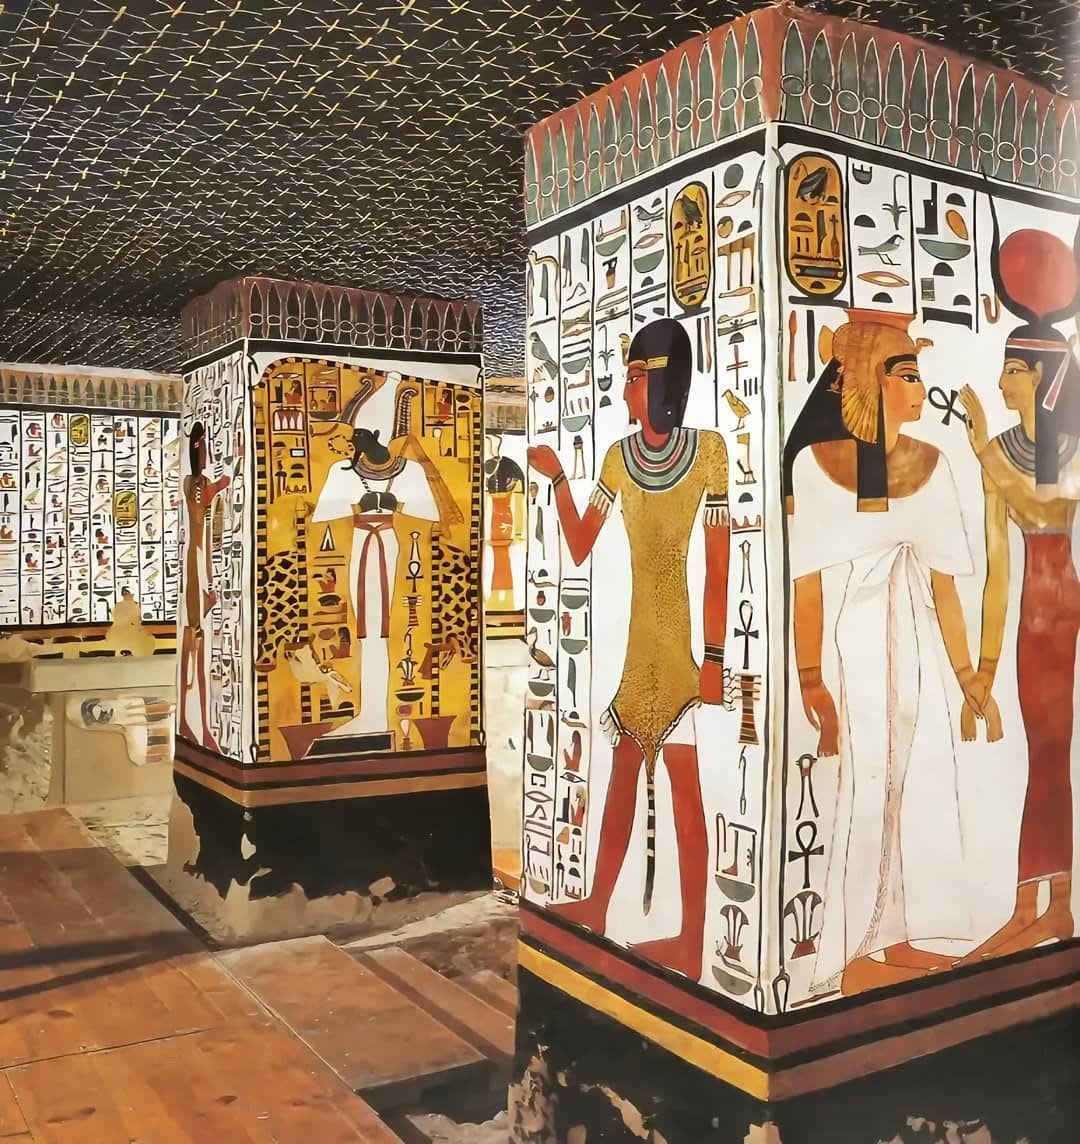 The 3,200-year-old tomb of Queen Nefertari, also called the Sistine Chapel of Ancient Egypt. The paintings, which are found on almost every available surface in the tomb, are considered to be the best preserved and most eloquent decorations of any Egyptian burial site